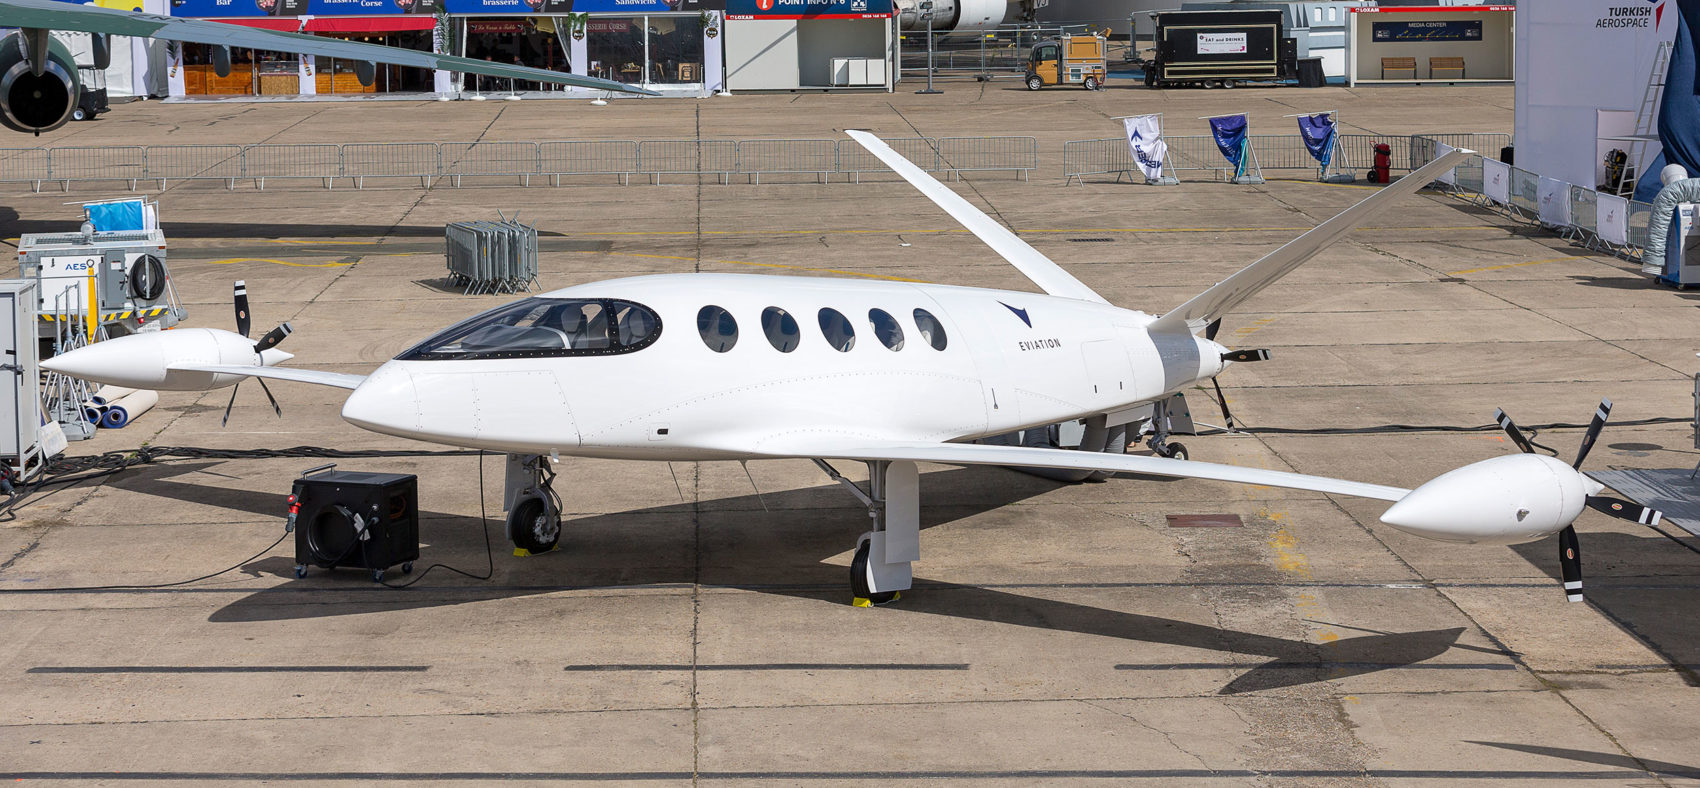 Eviation's Alice electric plane is seen at the Paris Air Show (Courtesy of Eviation)